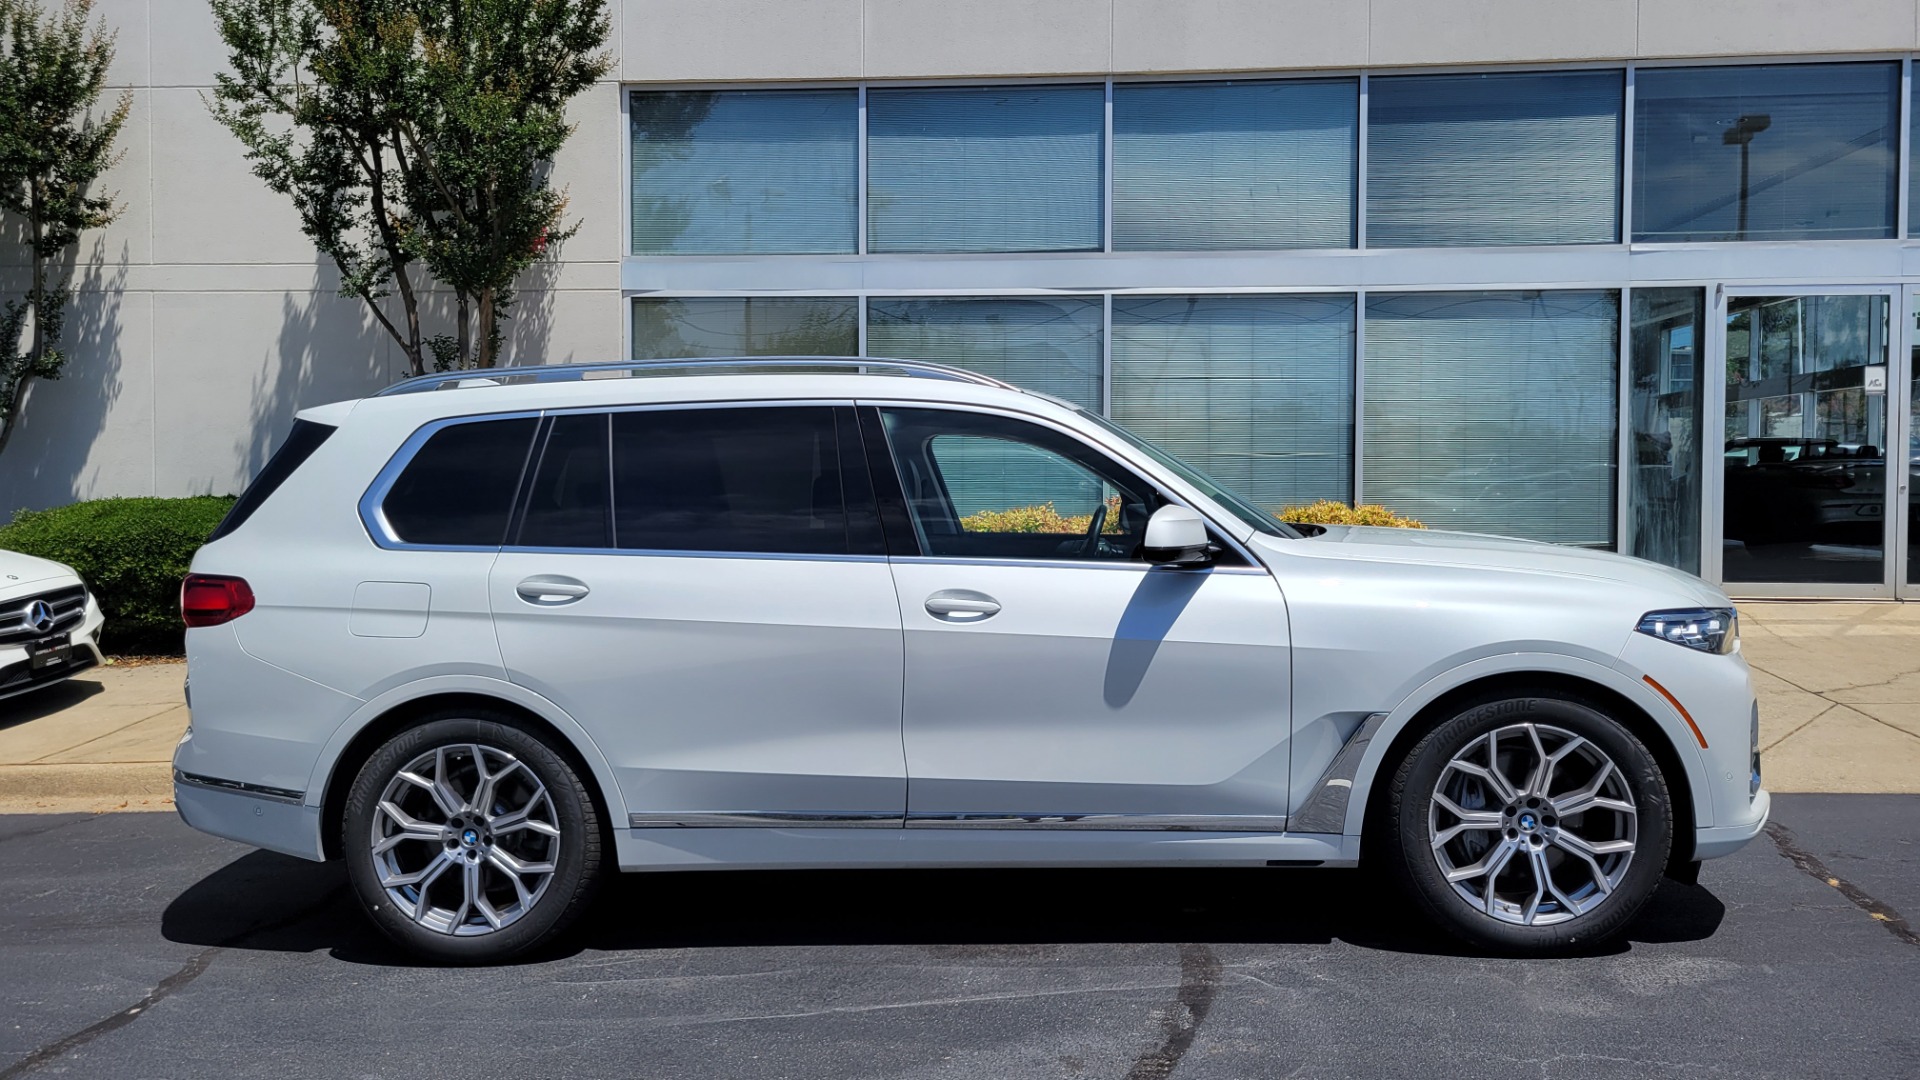 Used 2019 BMW X7 XDRIVE40I PREMIUM / NAV / HUD / PARK ASST PLUS / REMOTE START / 3D VIEW for sale $62,995 at Formula Imports in Charlotte NC 28227 6